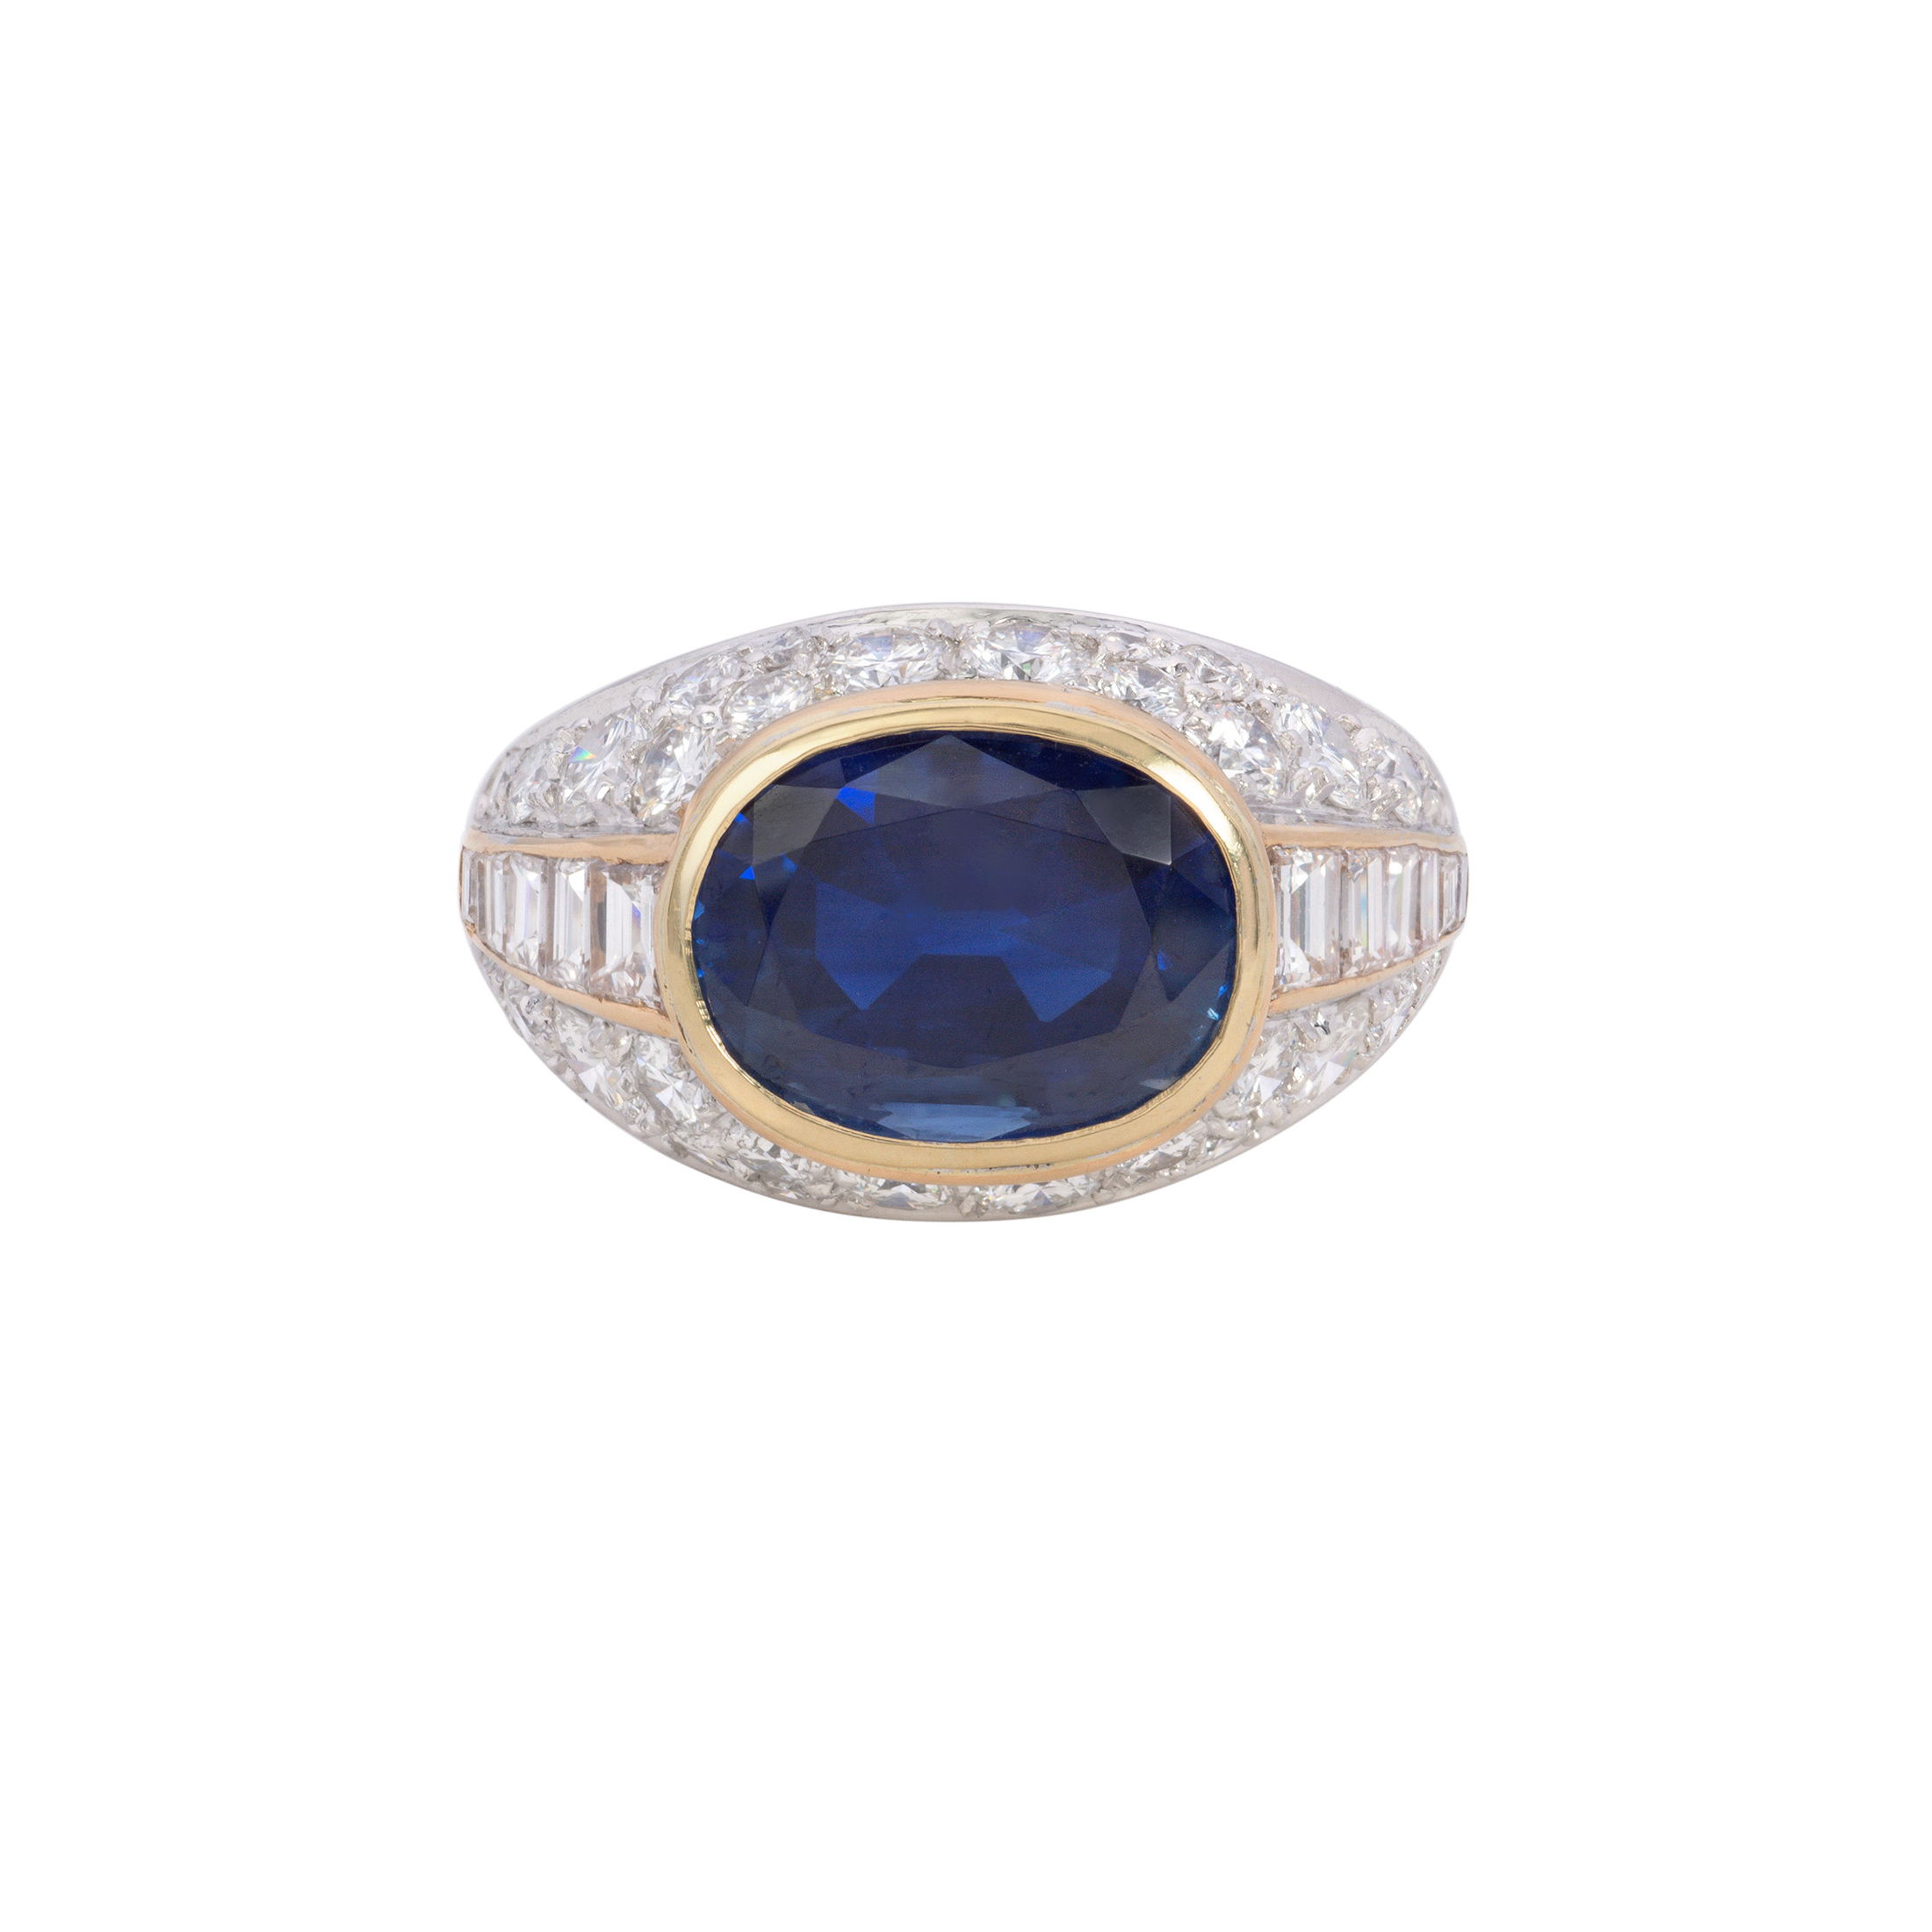 vintage sapphire and diamond ring from American Trading Enterprises